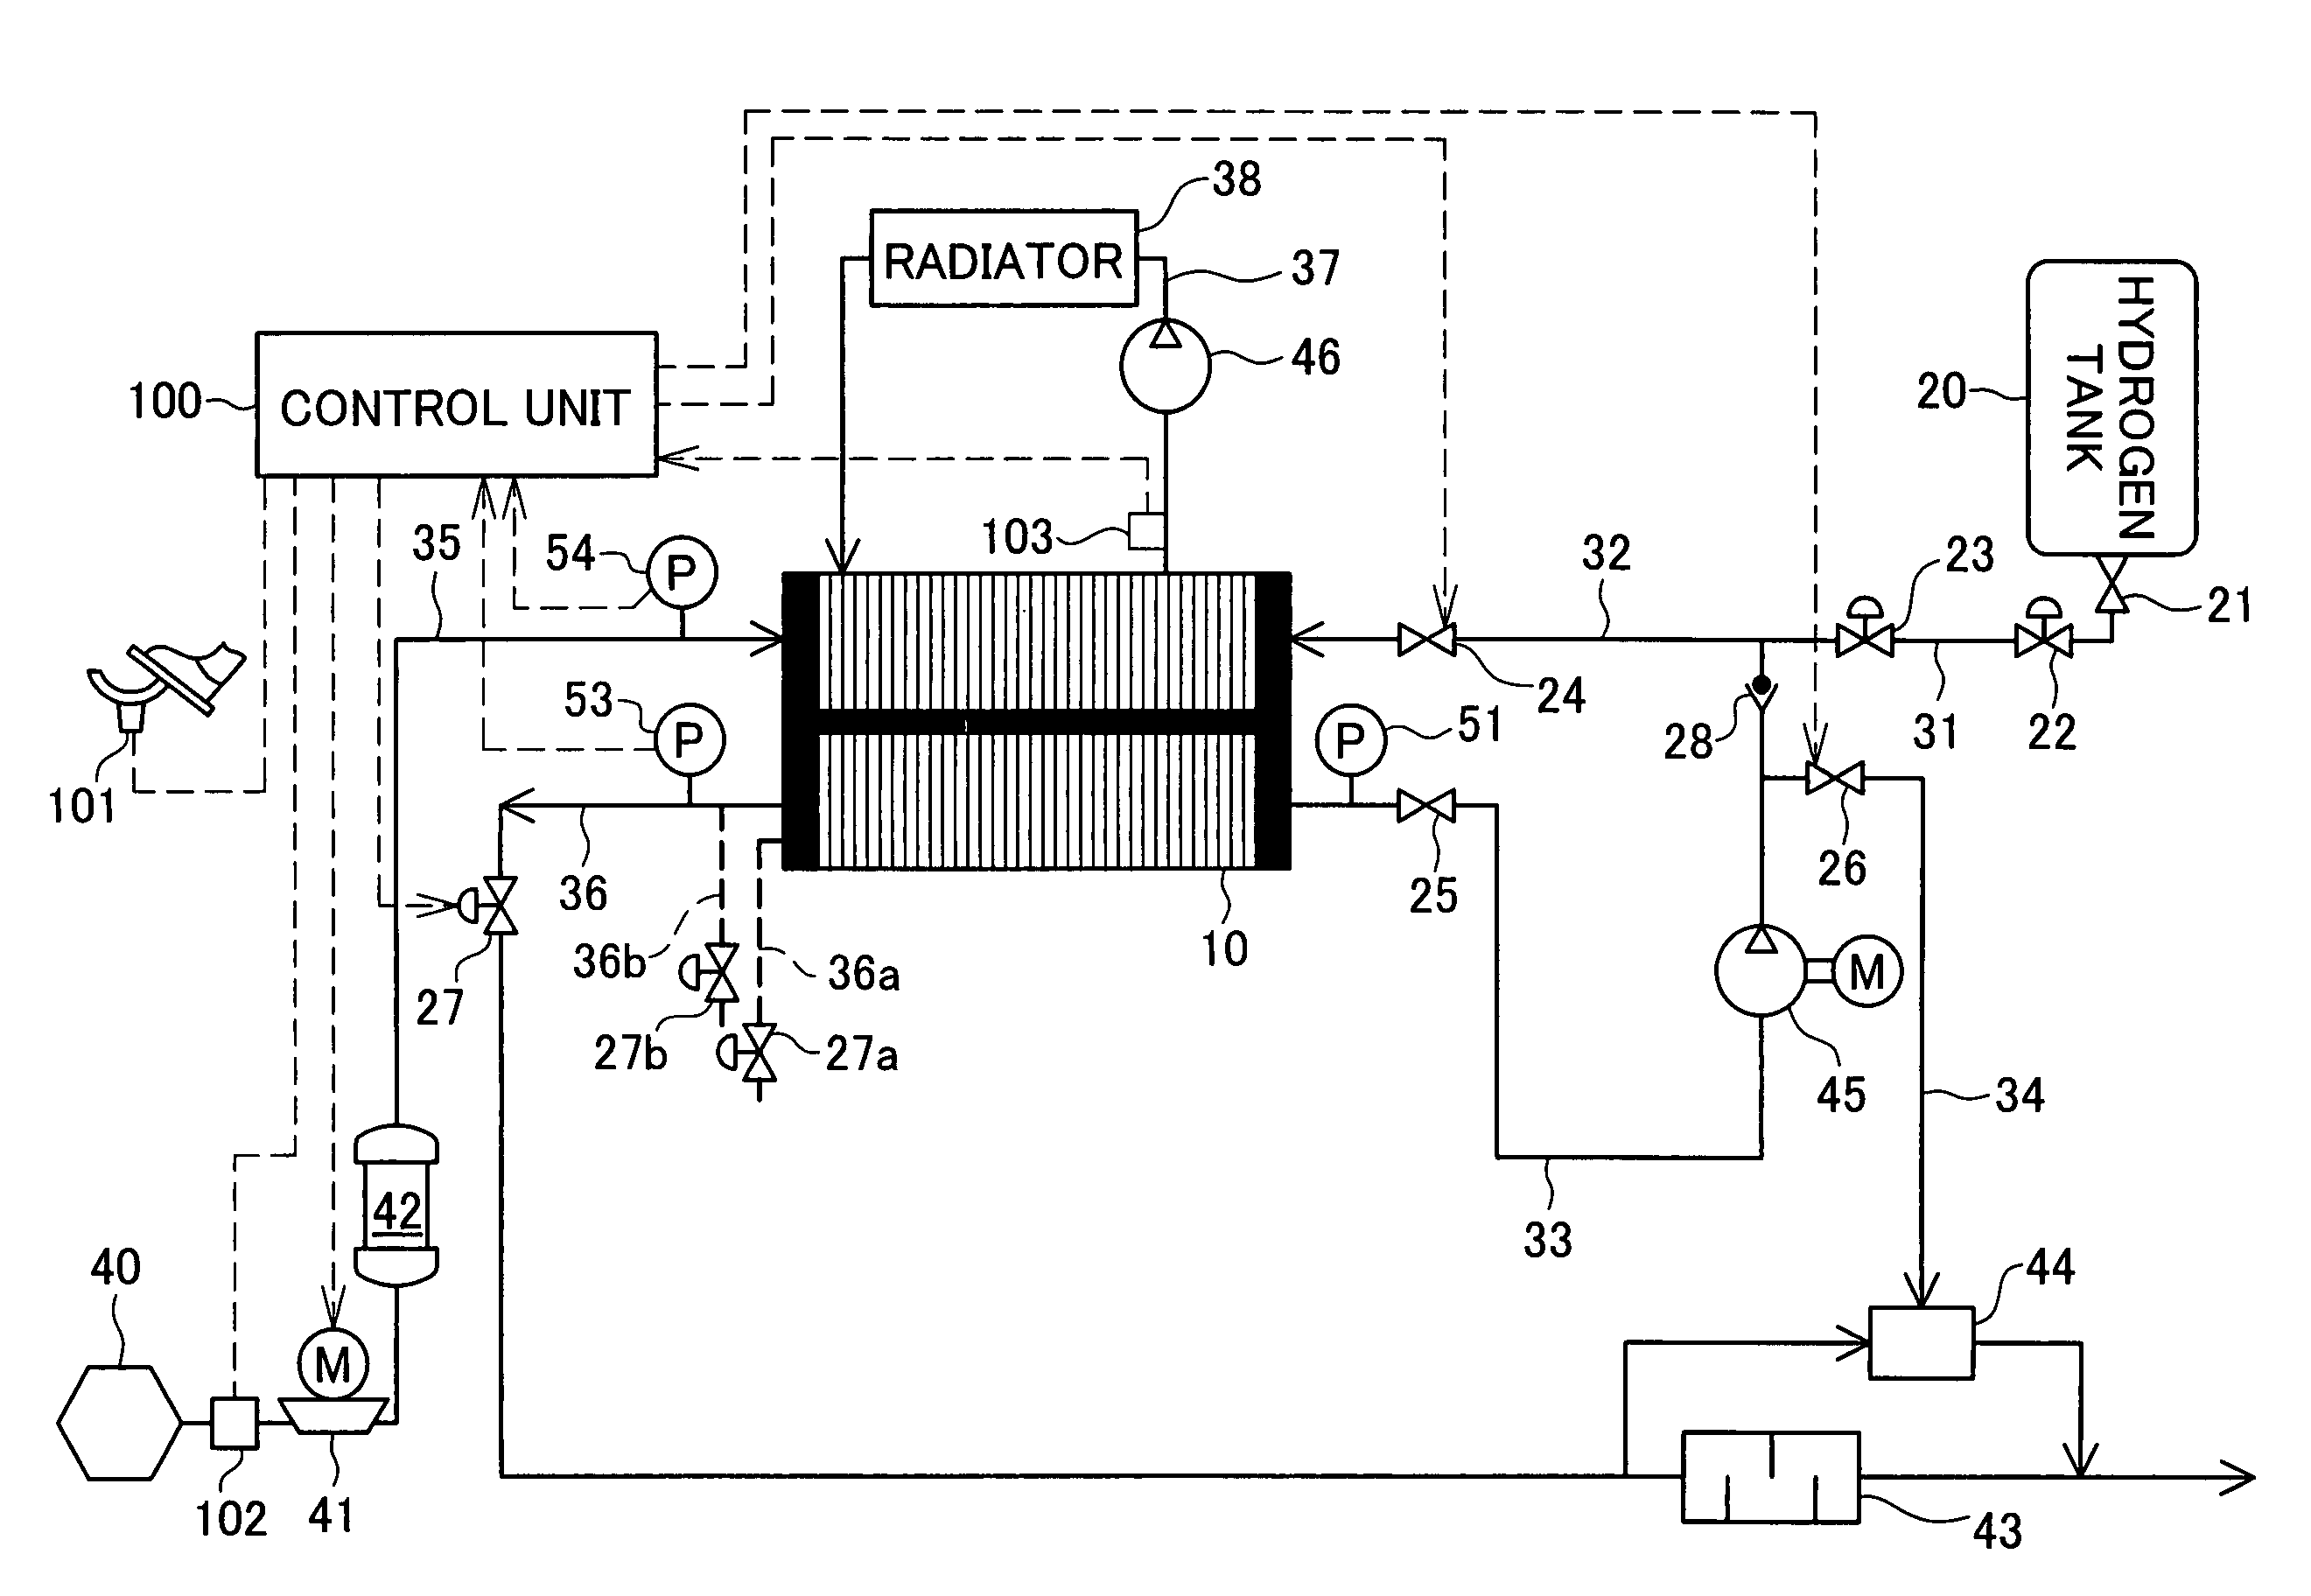 Operation control of a fuel cell system